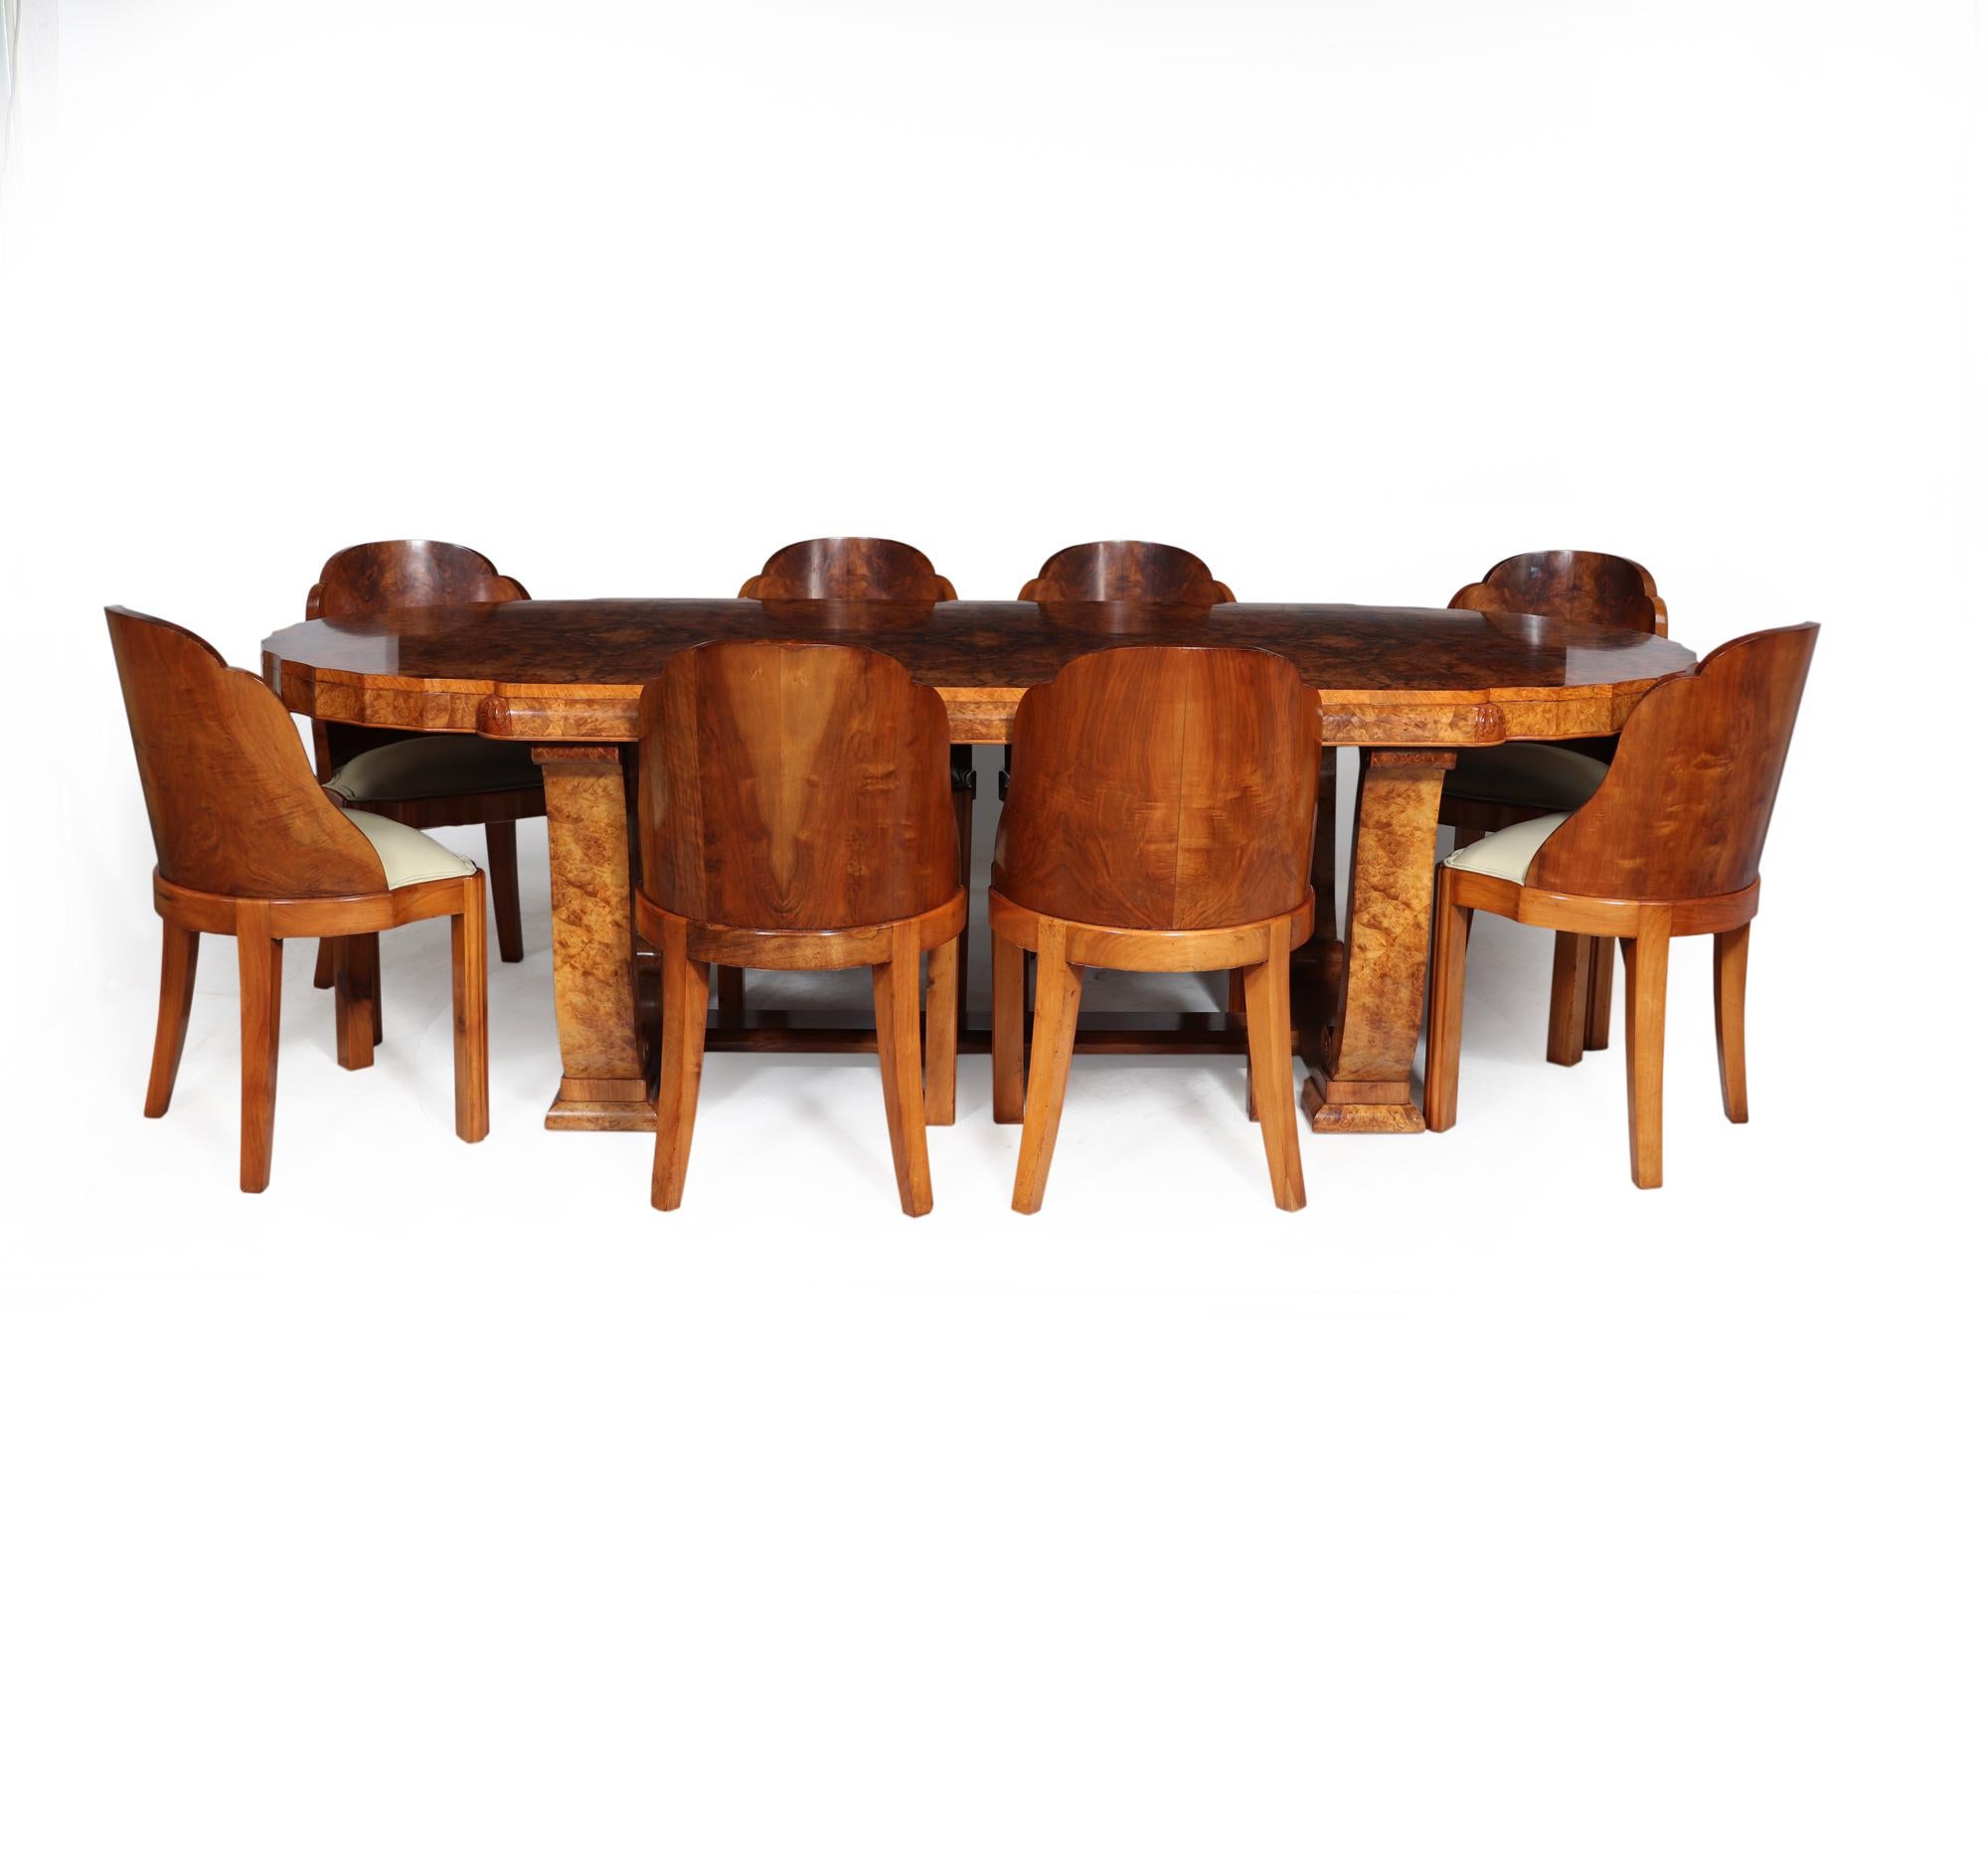 A British Art Deco Dining Suite by Hille produced in London in the 1930’s The Table has a large one piece top with highly figured burr walnut book matched veneers, the curved ends are fluted and stands on a very strong and solid base with scrolling